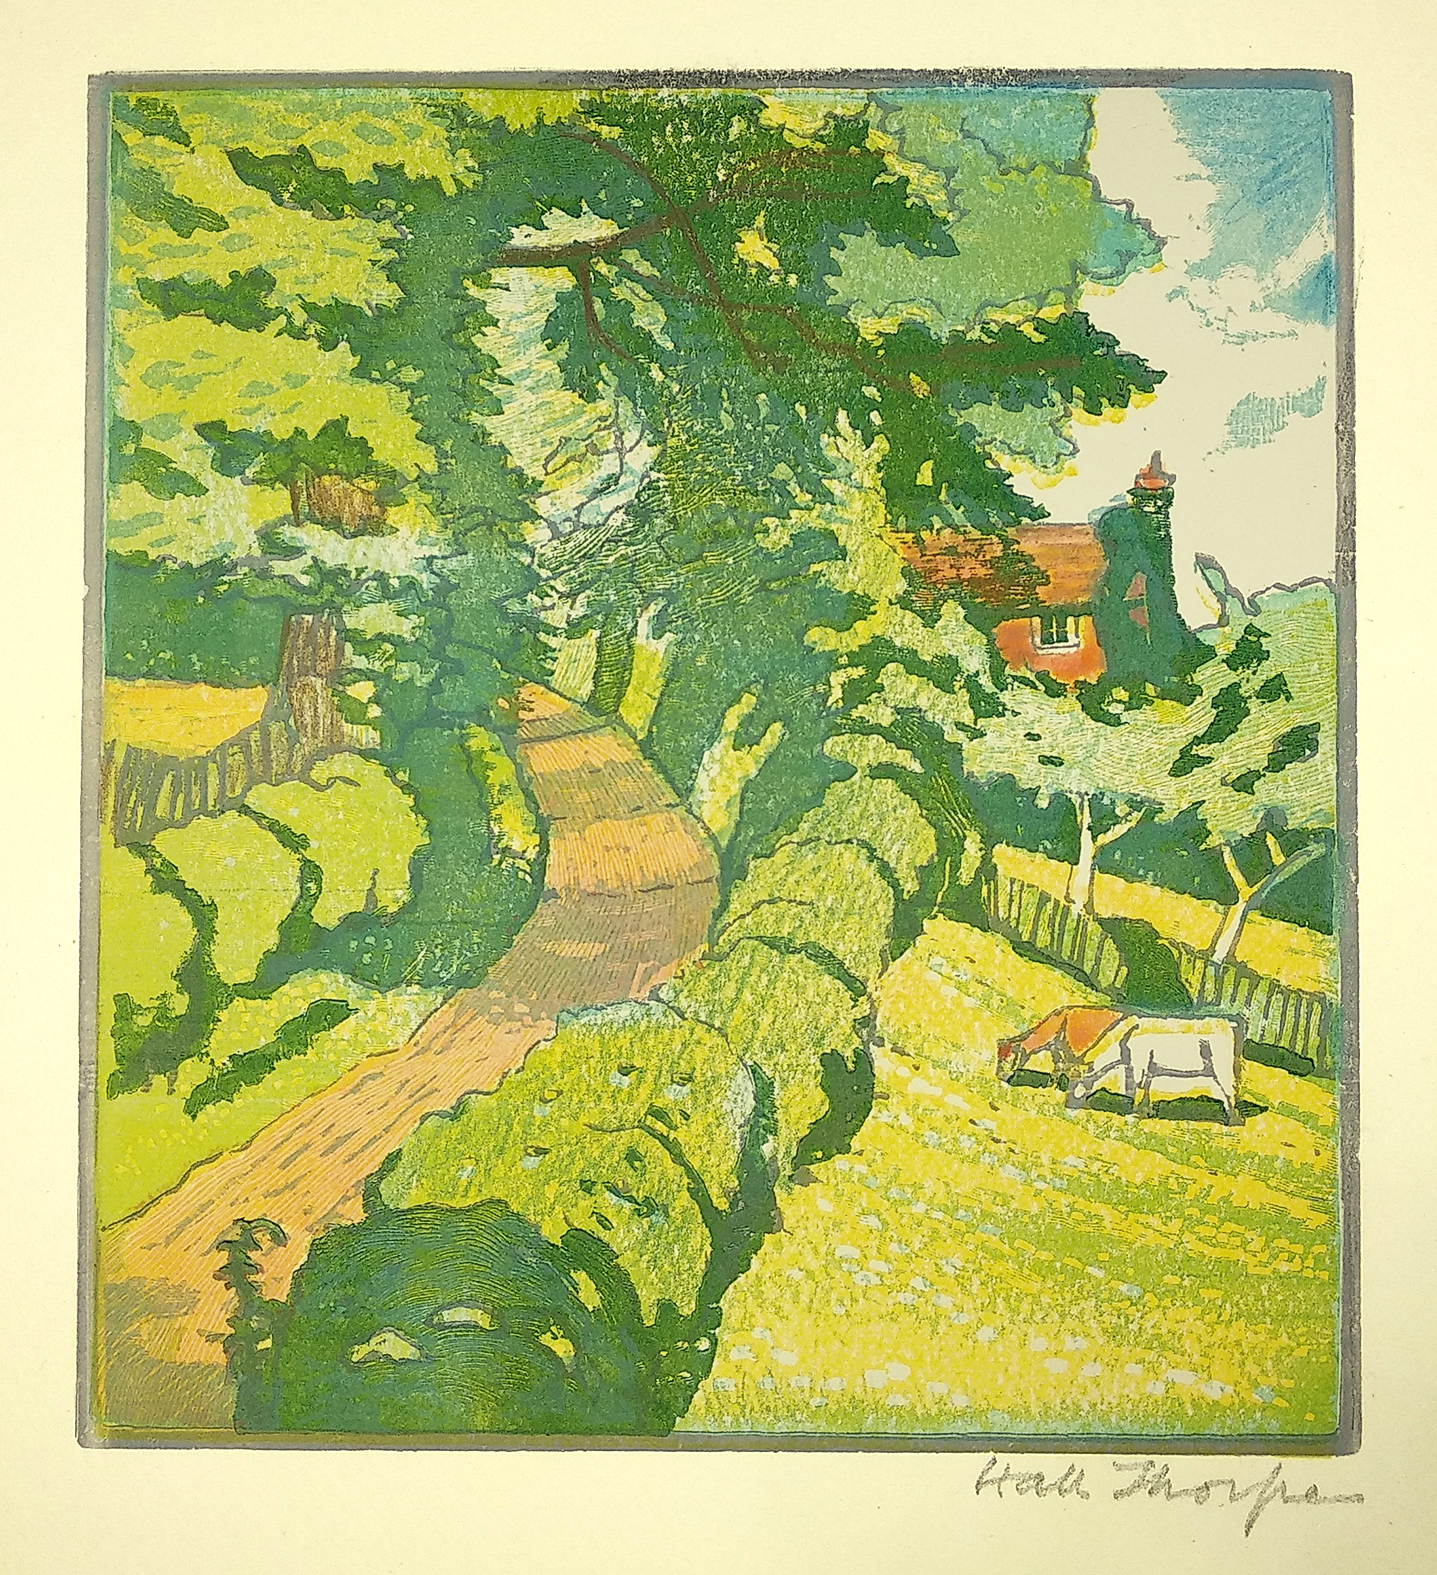 [Untitled] - Vintage Print from 1925